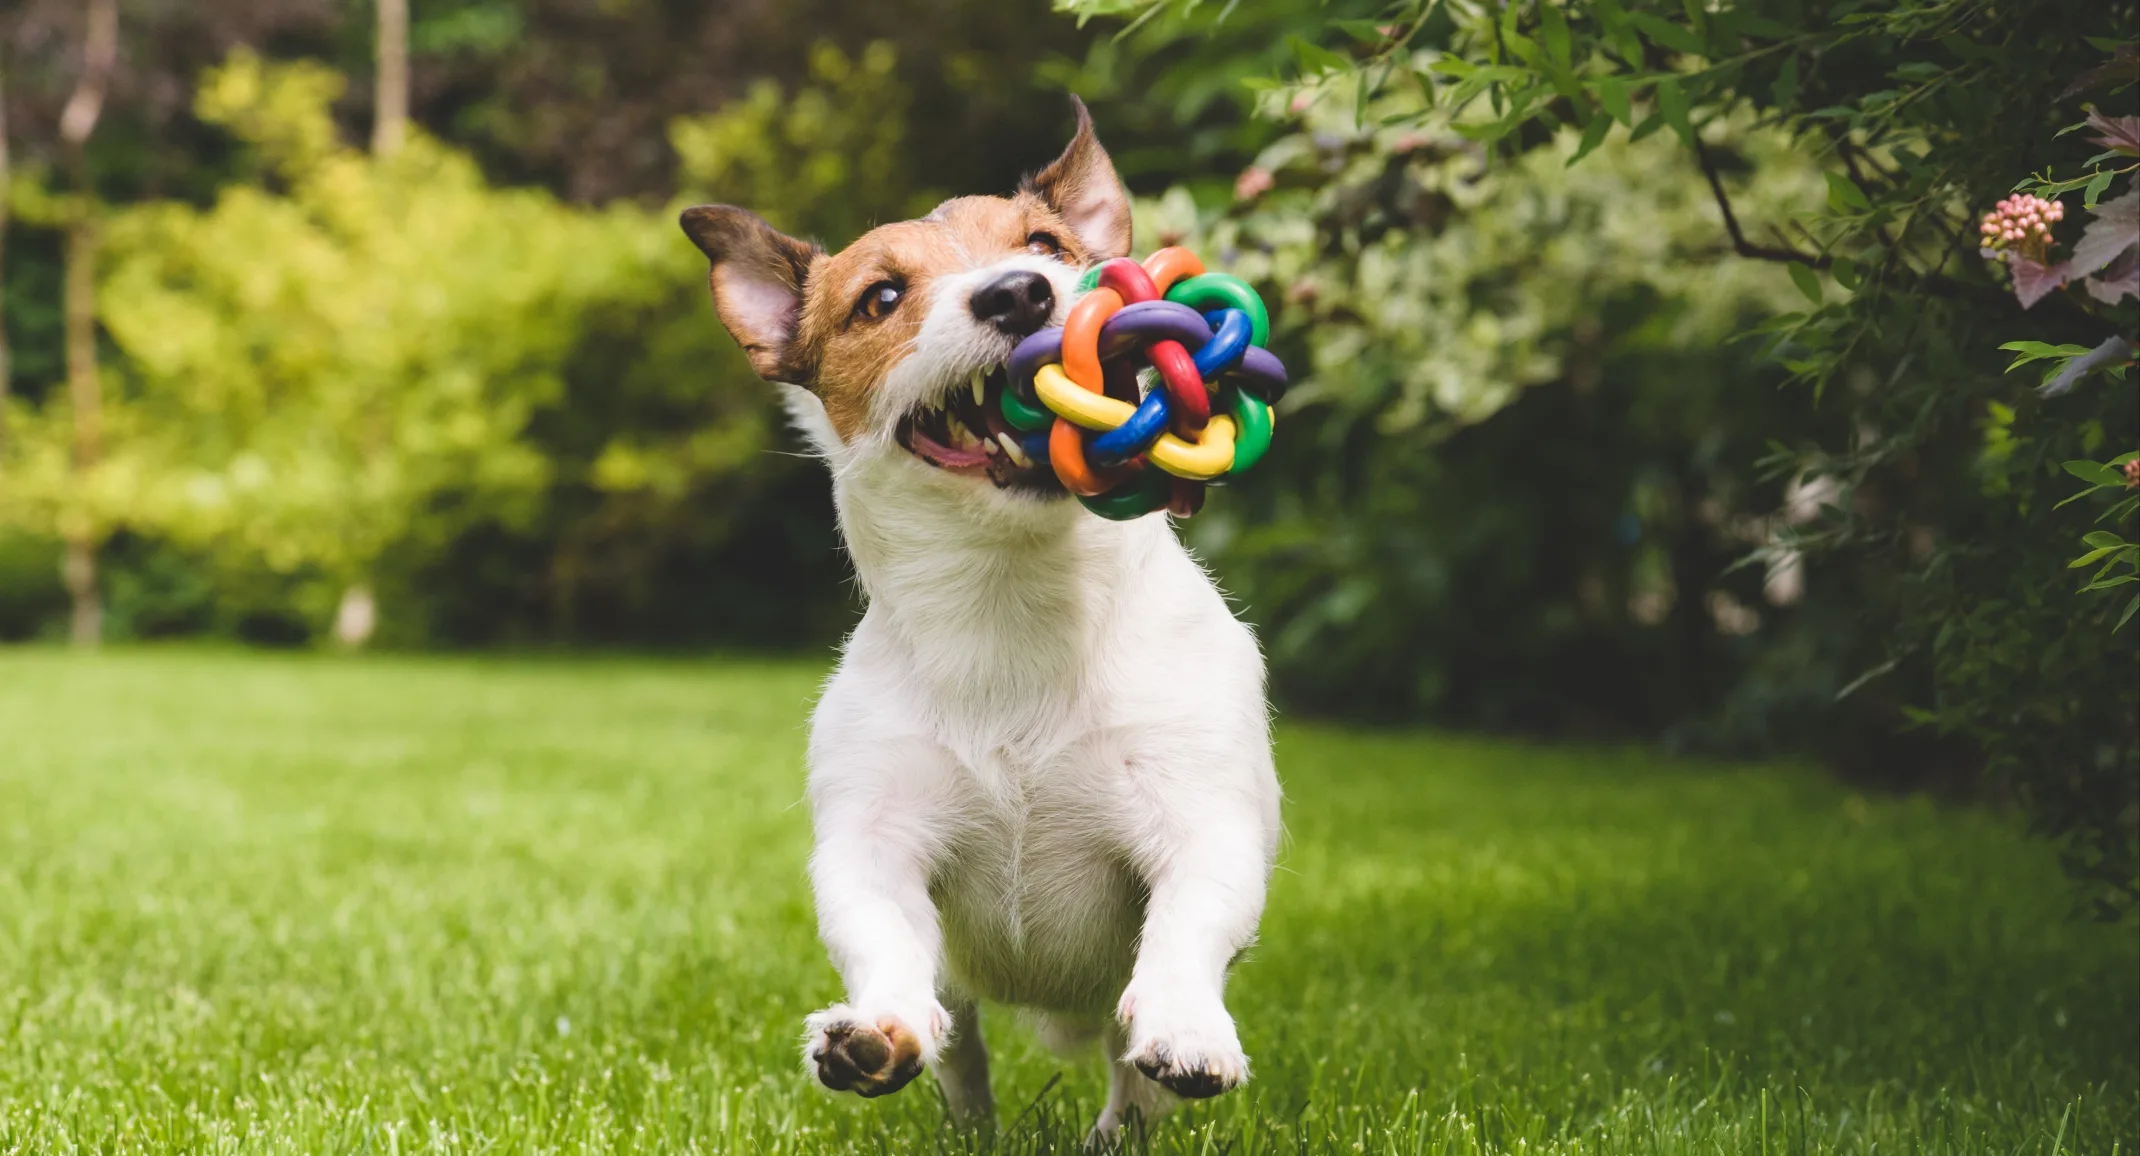 Dog running in a grass field with a multi-colored toy in its mouth